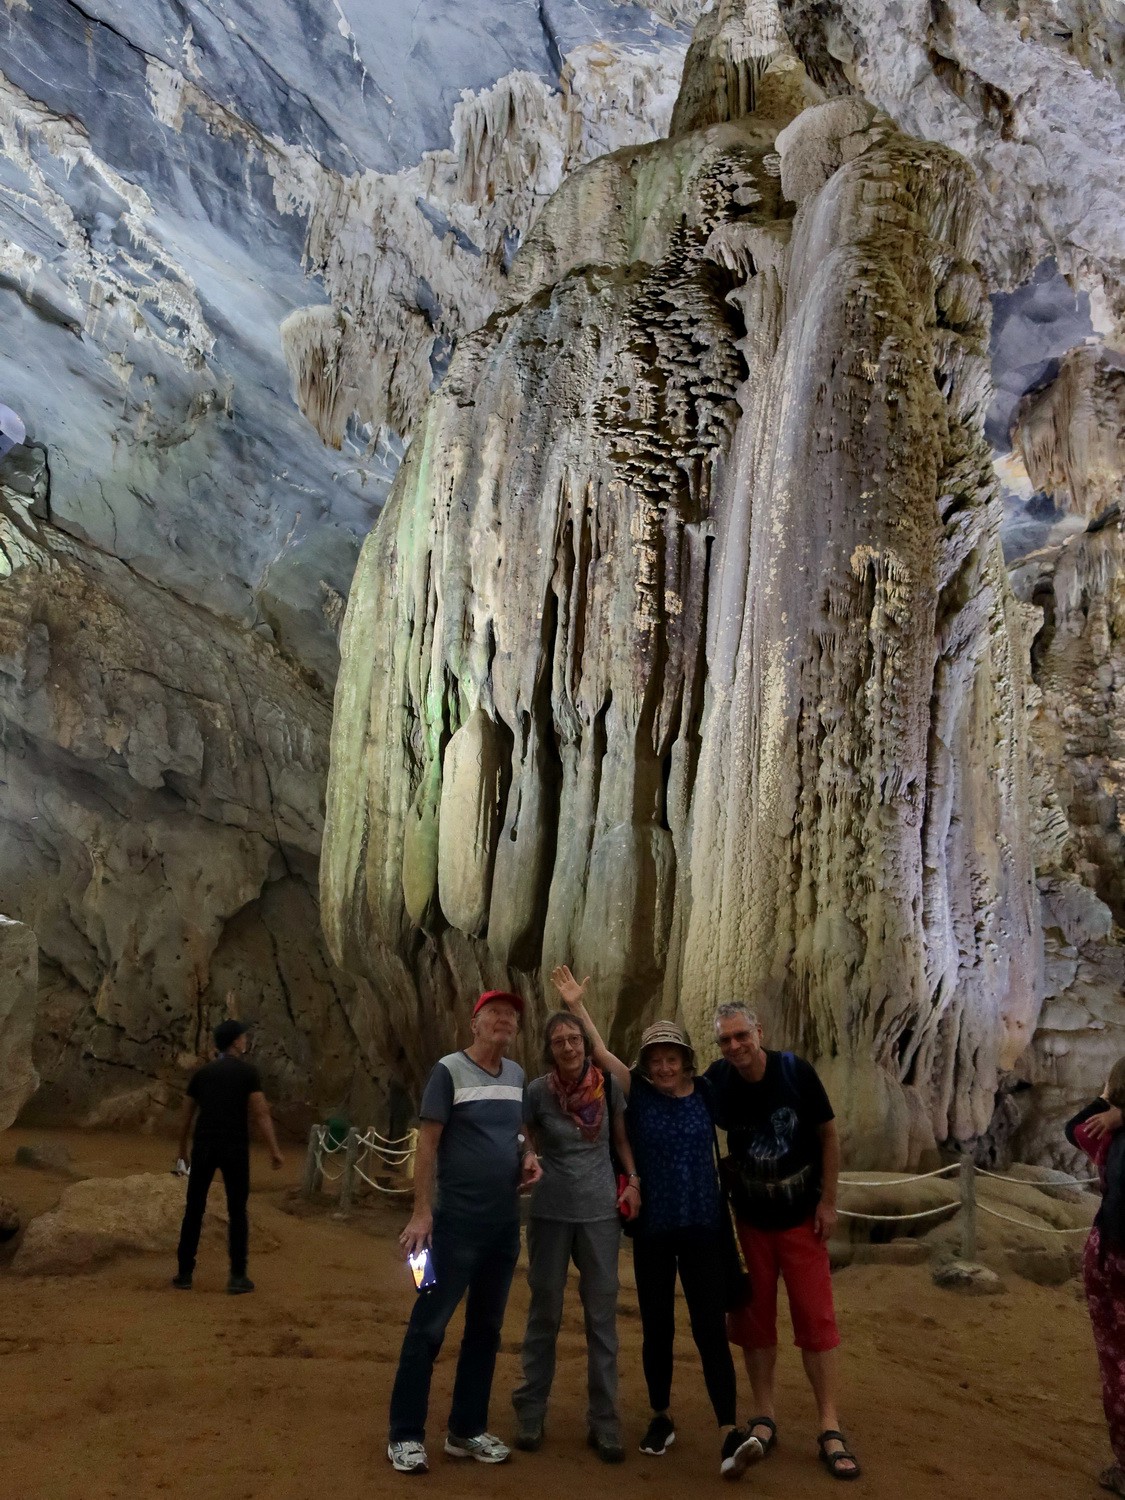 Hermann, Jutta, Marion and Alfred in the Phong Nha Cave